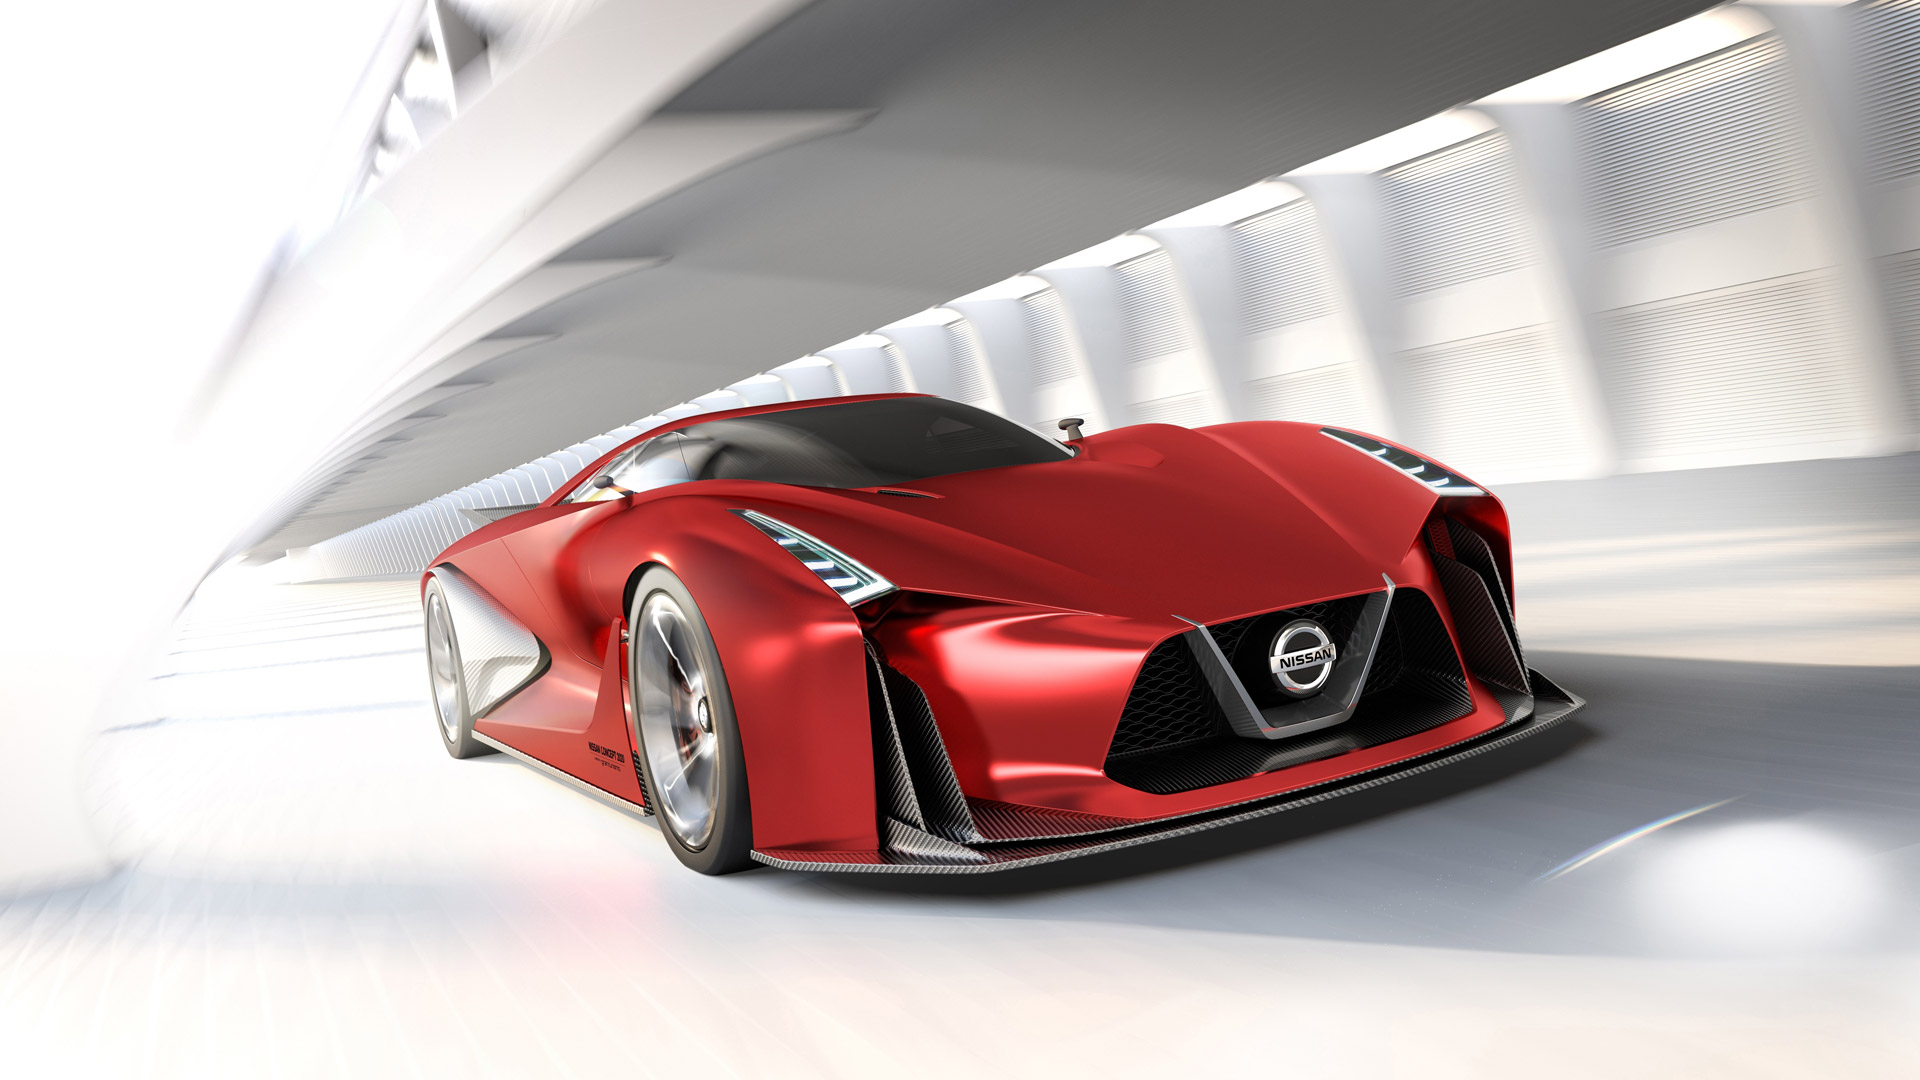 Updated Concept Vision Gt Headlines Nissan S 15 Tokyo Motor Show Lineup